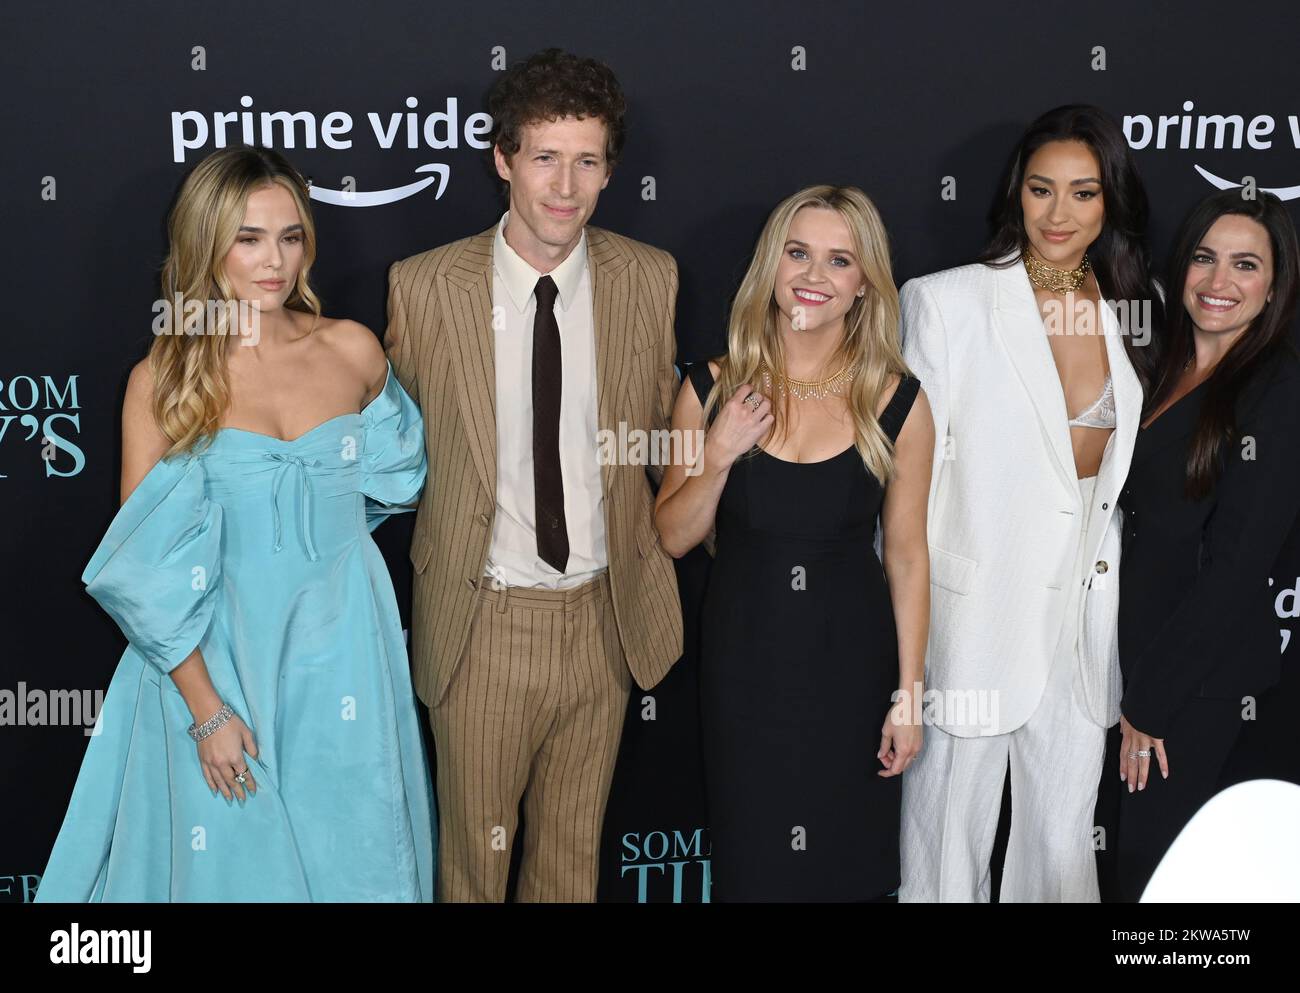 Los Angeles, USA. 29th Nov, 2022. Zoey Deutch, Daryl Wein, Reese  Witherspoon, Shay Mitchell & Lauren Levy Neustadter at the premiere for  